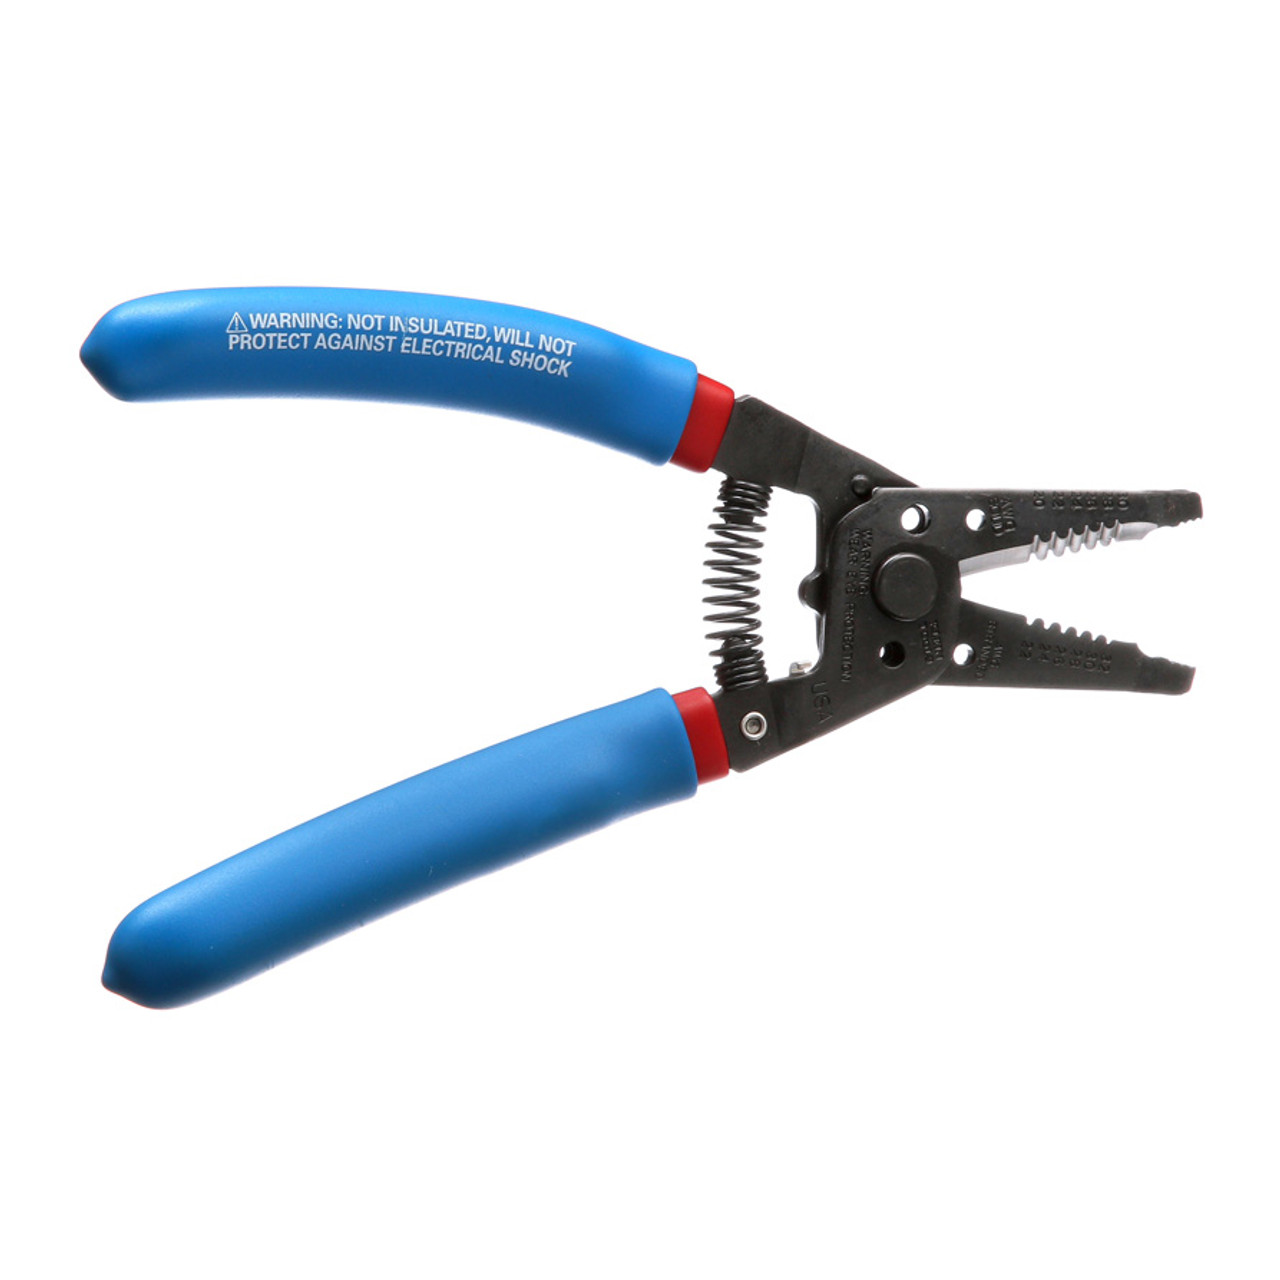 Klein Tools J207-8CR All-Purpose Pliers with Crimper